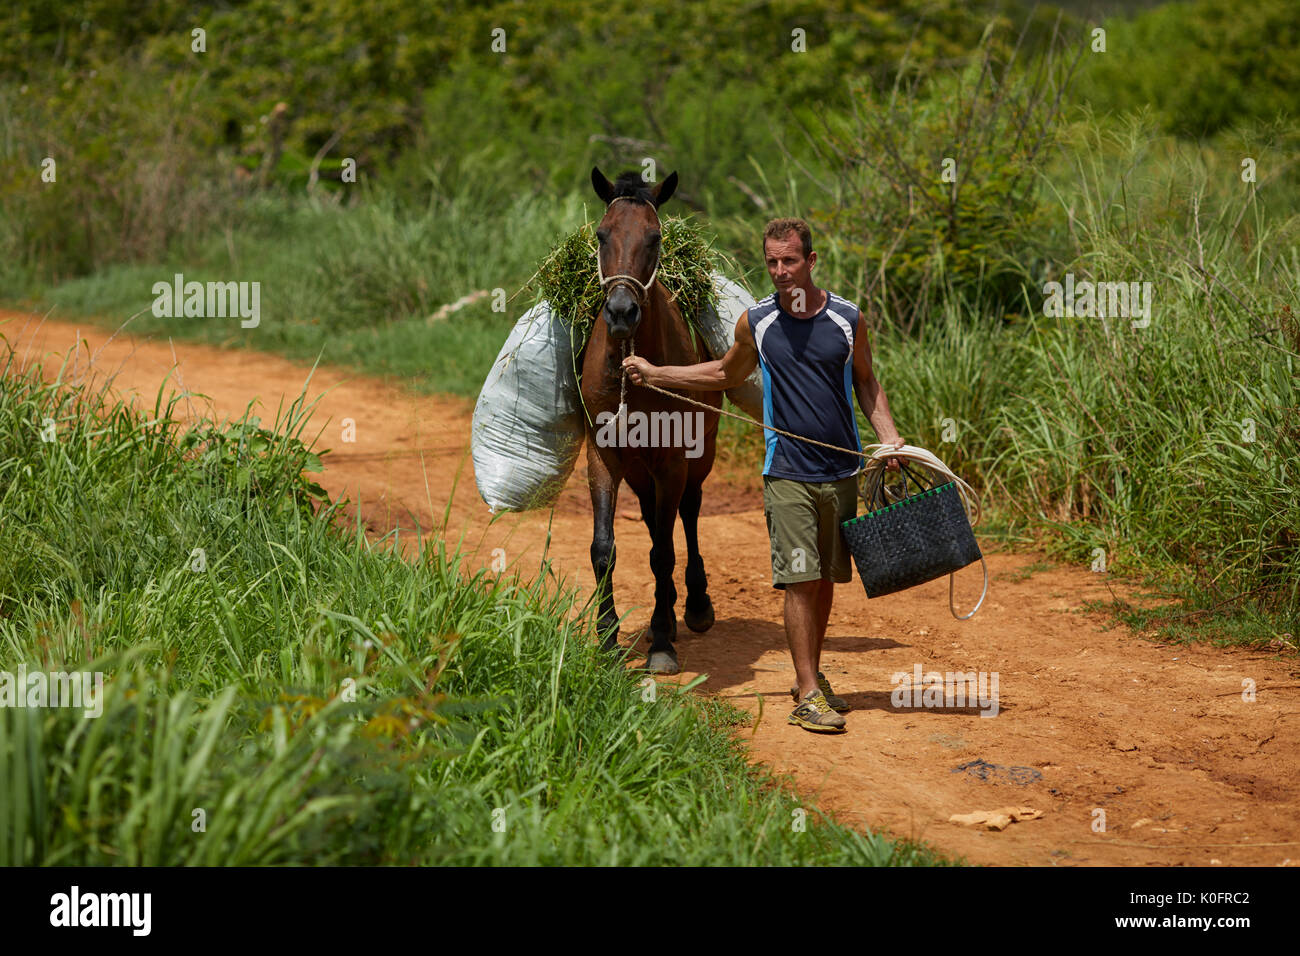 Cuban, Cuba, Cardenas, villager walking with his horse on dirt track Stock Photo